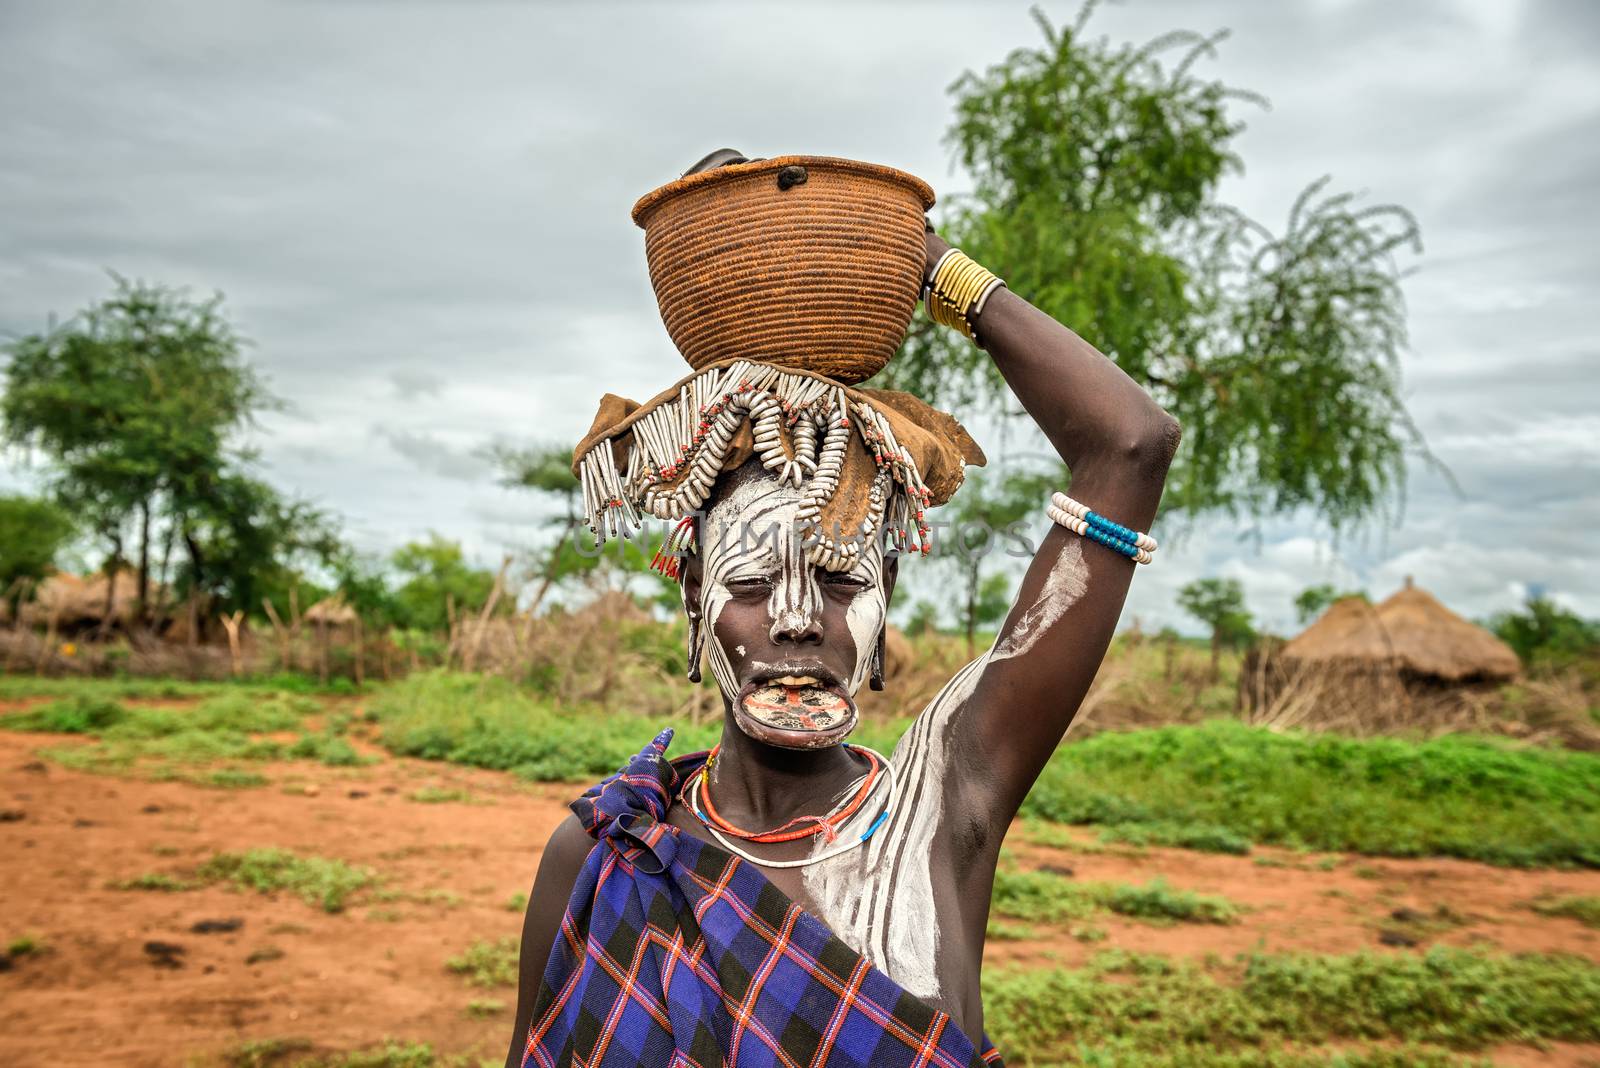 OMO VALLEY, ETHIOPIA - MAY 7, 2015 : Woman from the african tribe Mursi with big lip plate and with a basket on her head